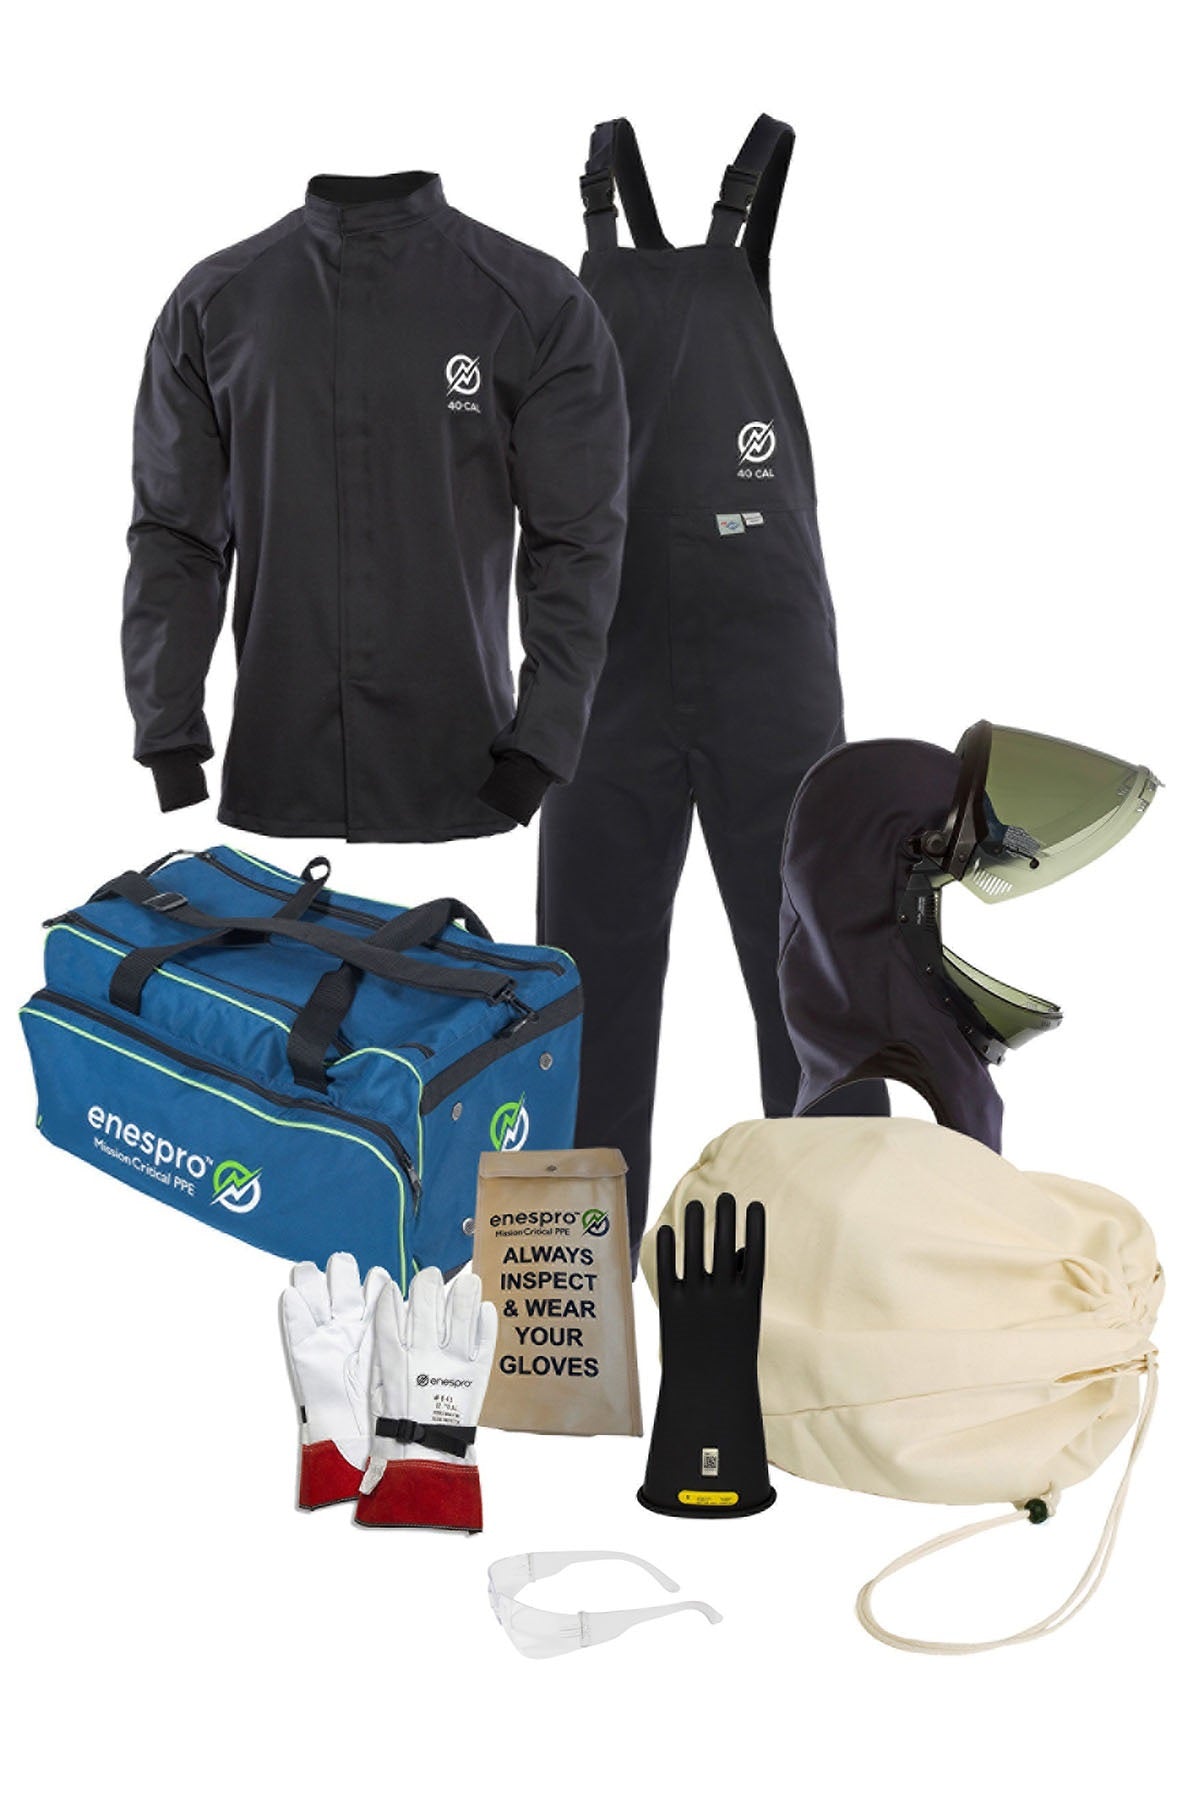 Enespro ArcGuard 40 cal Arc Flash Kit with Lift Front Hood & Voltage Gloves